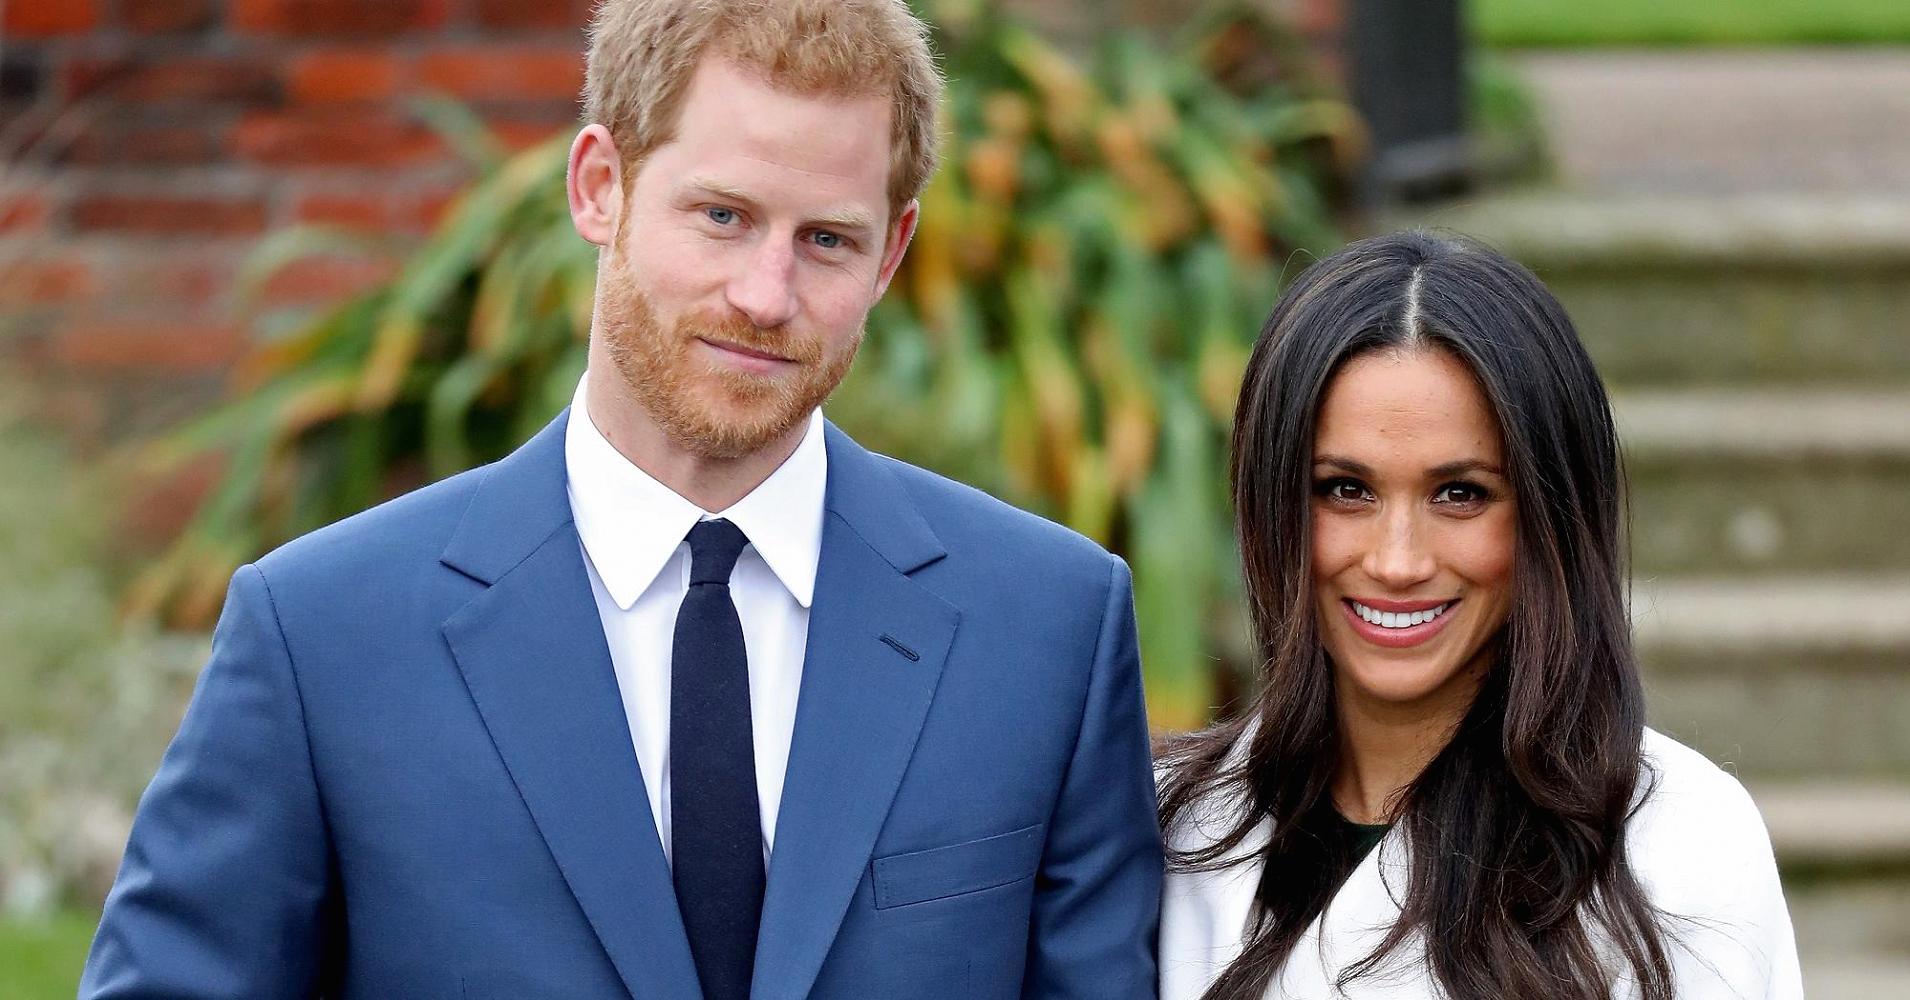 Prince Harry & Meghan Markle Say They Don't Want Wedding Gift